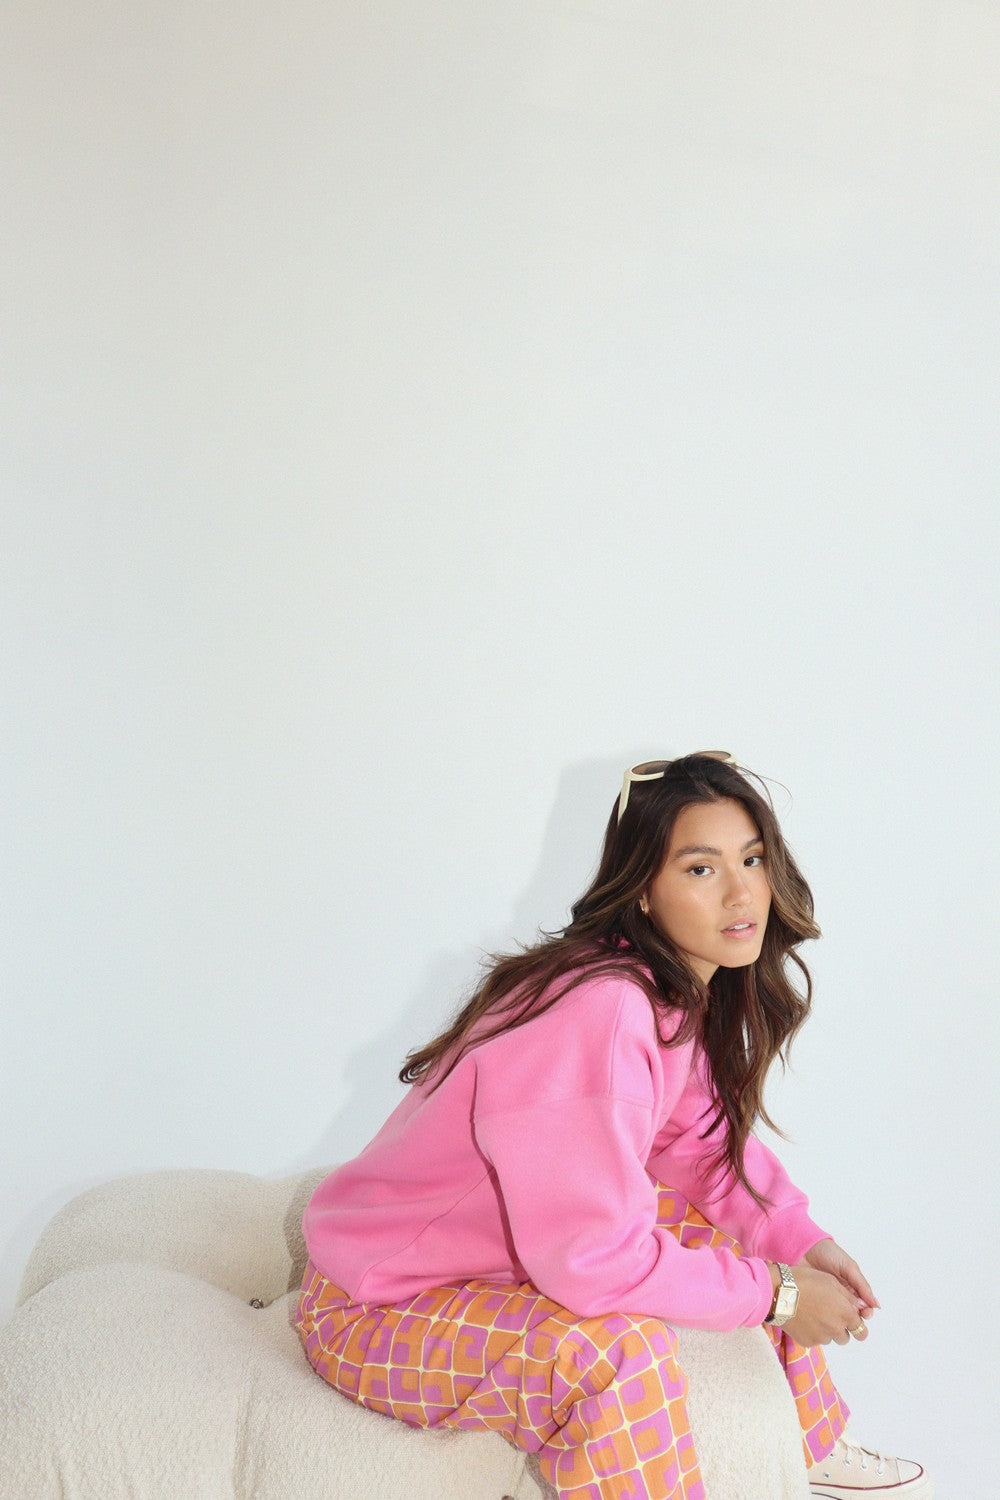 Oversized fleece-lined crewneck sweatshirt in pink.  Embroidered on the front with "Malibu Athletics" and rackets.  Side view.